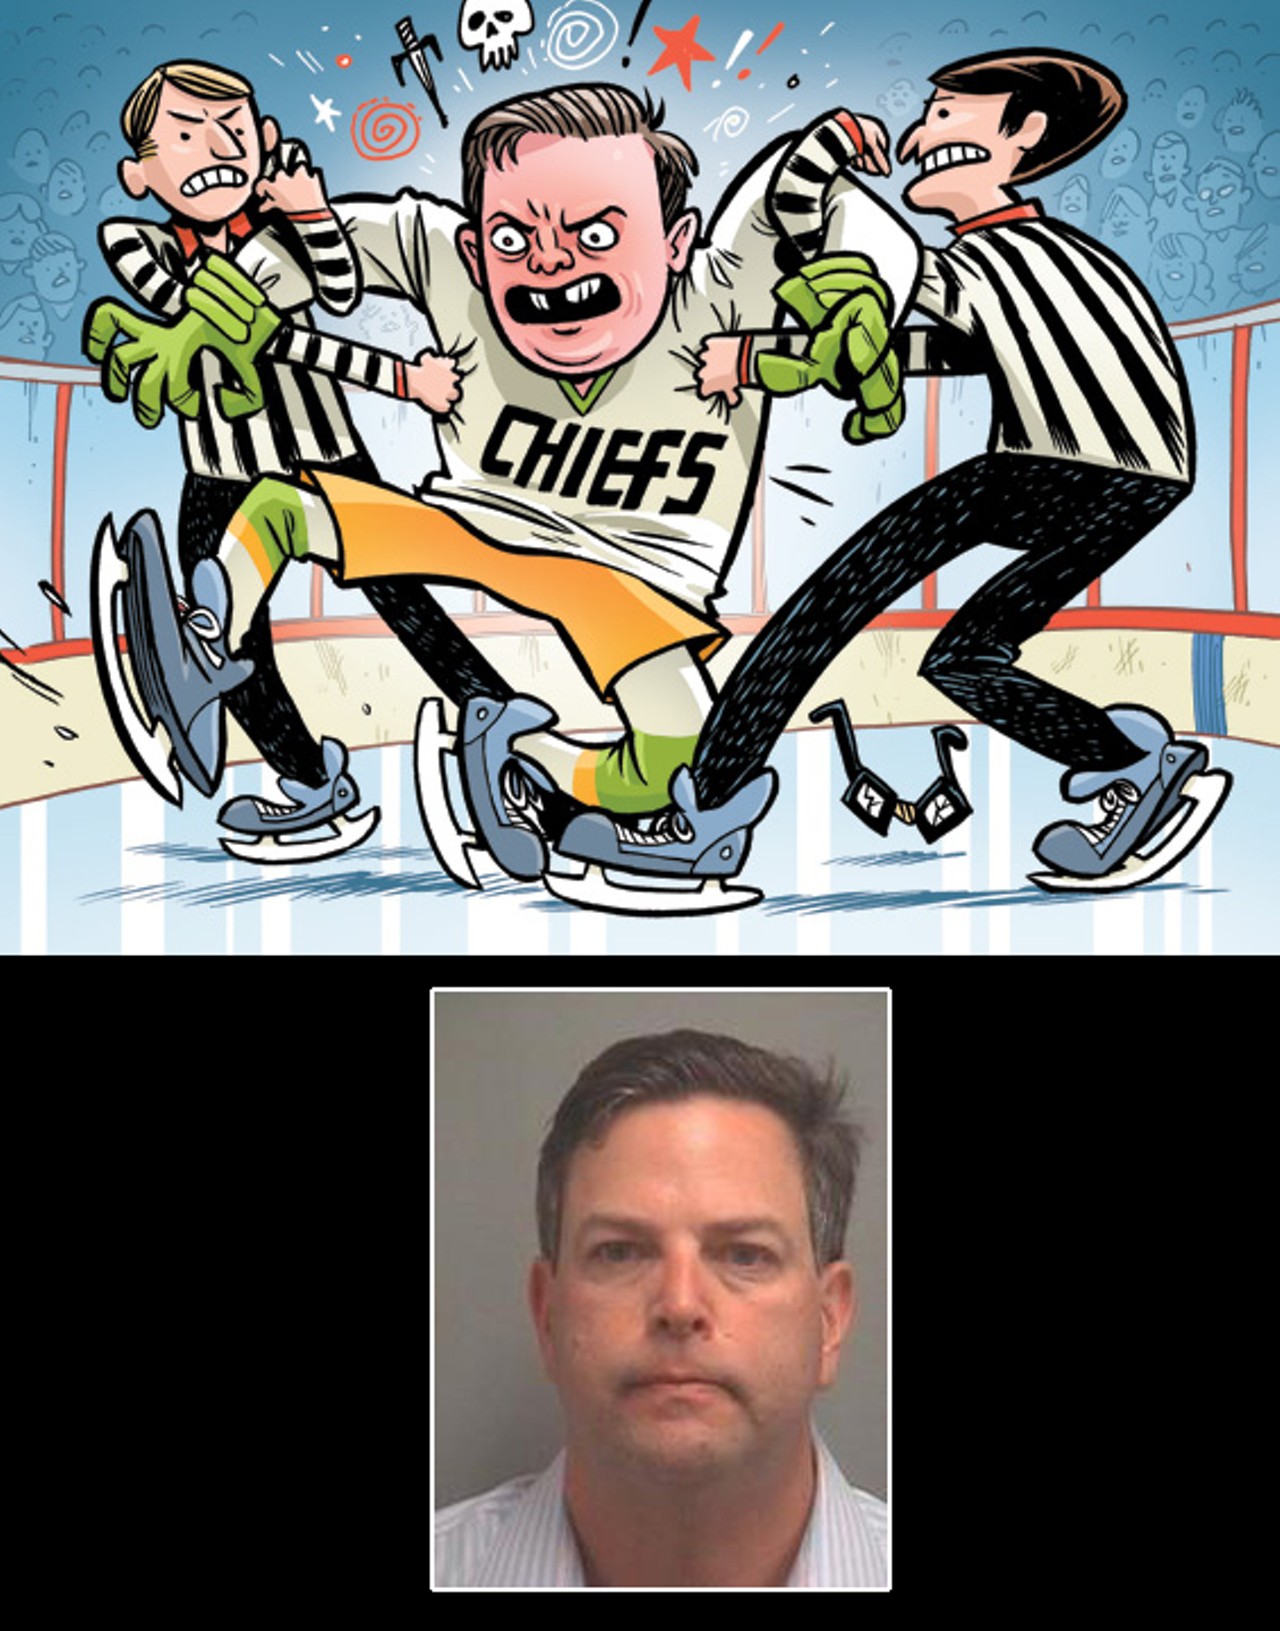 12. Matthew Supran
Delray Beach, Florida chiropractor Matthew Supran was watching his son's hockey game when a 14-year-old opposing player elbowed his boy in the face. A ref ruled the hit non-malicious, giving the kid a five-minute penalty under hockey's sentencing guidelines of assault. 
Yet Supran had neglected to teach his son the game's prescribed response for an elbow to the face: a succession of retaliatory punches. Clearly he sucked as a Hockey Dad. 
So the 230-pound Supran ran onto the ice, punched the teen offender in the face, then grabbed his helmet and slammed his head into the boards in a naked attempt to compensate for bad parenting. He was arrested on charges of child abuse.